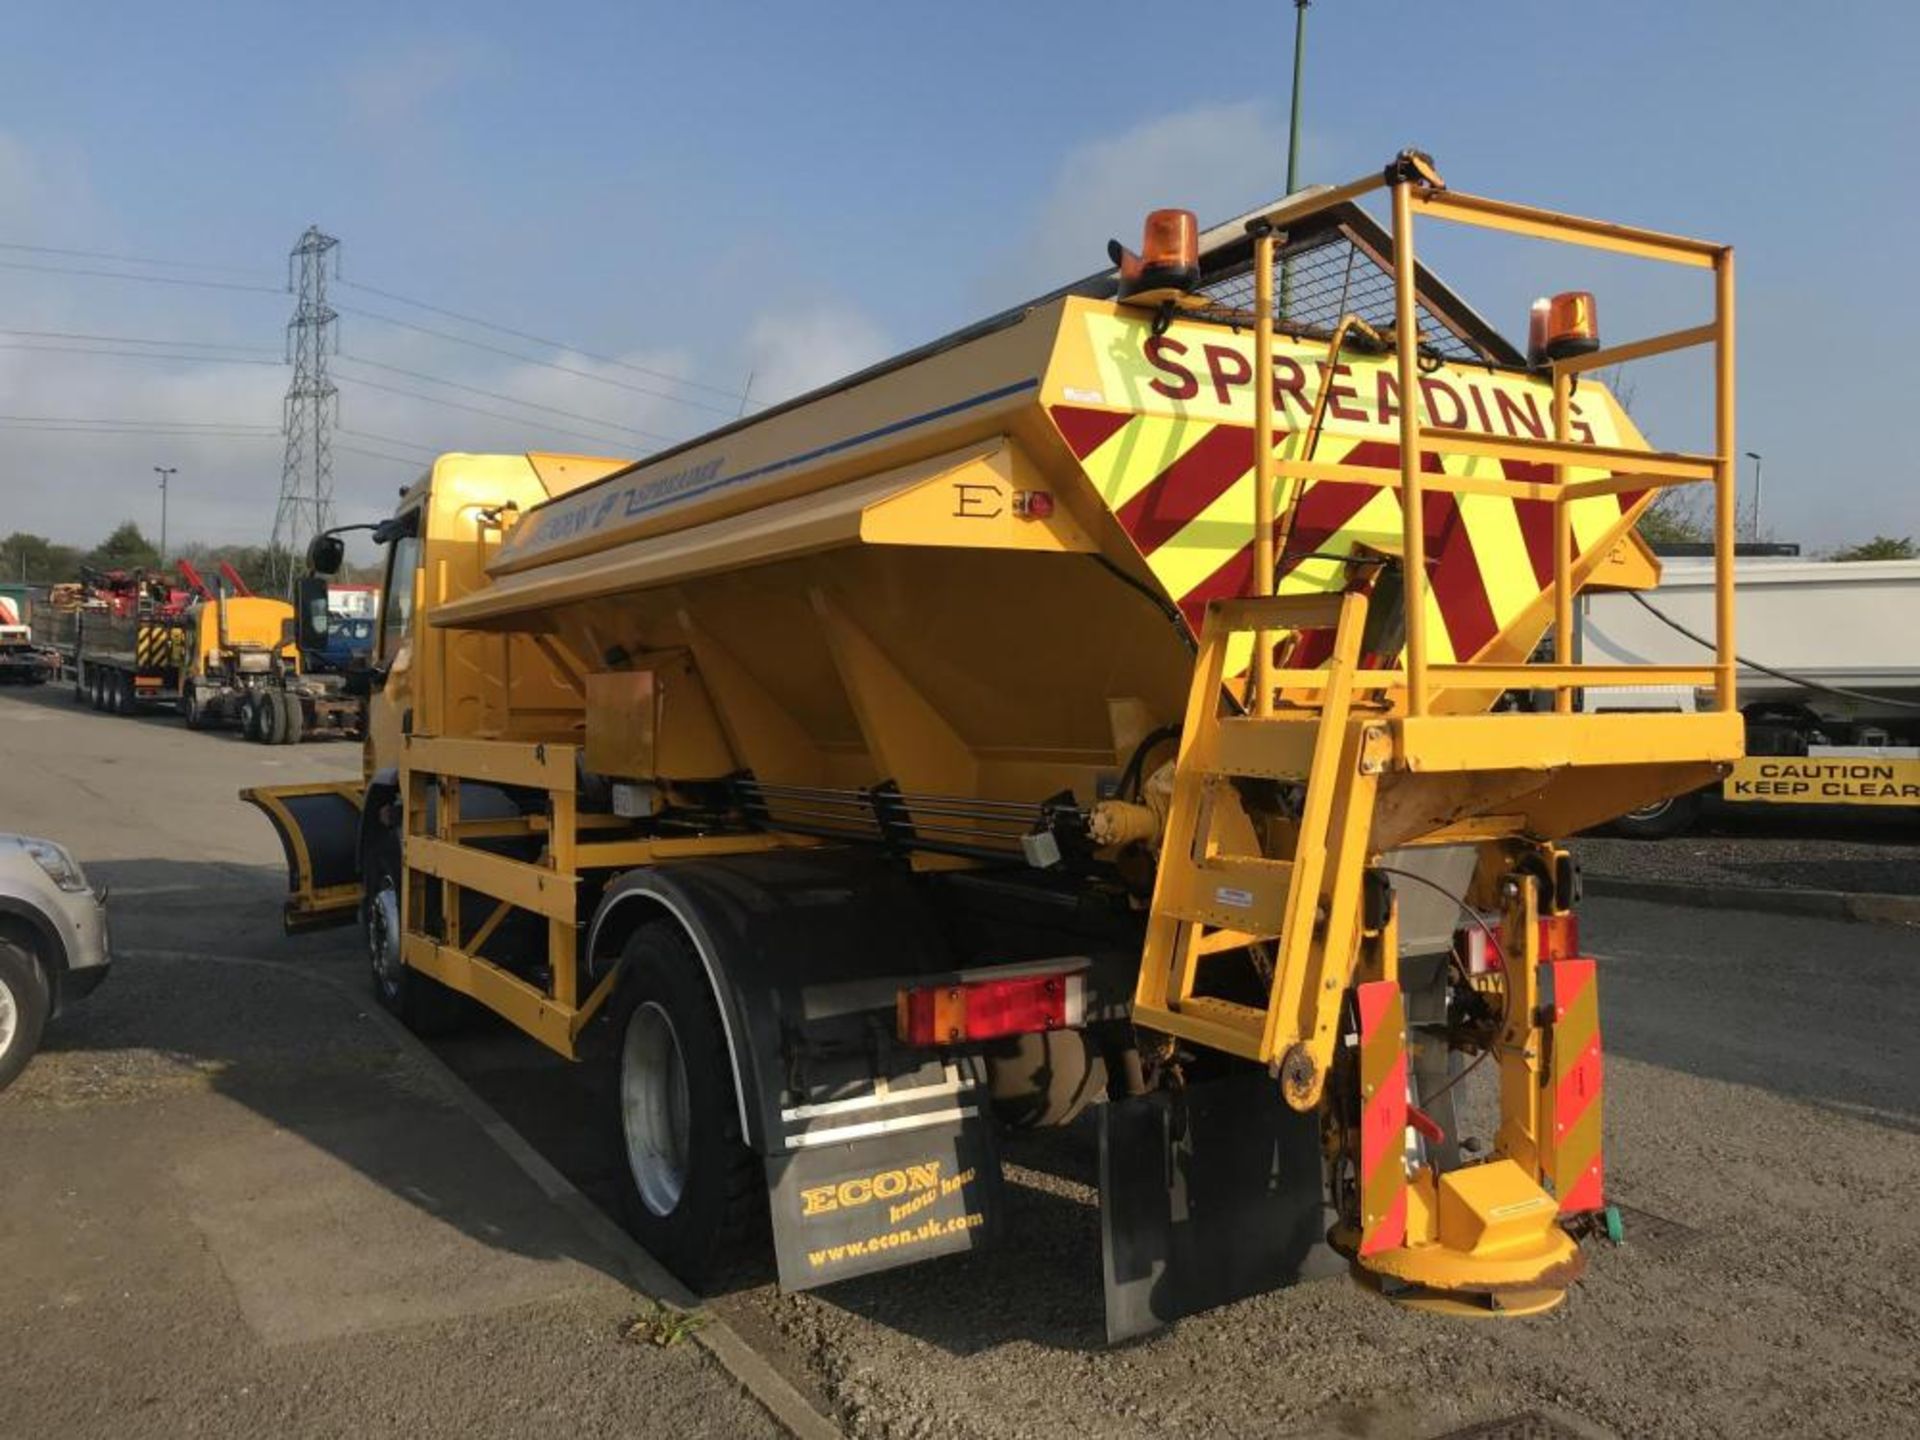 2005/05 REG DAF TRUCKS FA LF55.220 18 TON ECON BODY GRITTER WITH SNOW PLOUGH, EX COUNCIL *PLUS VAT* - Image 3 of 17